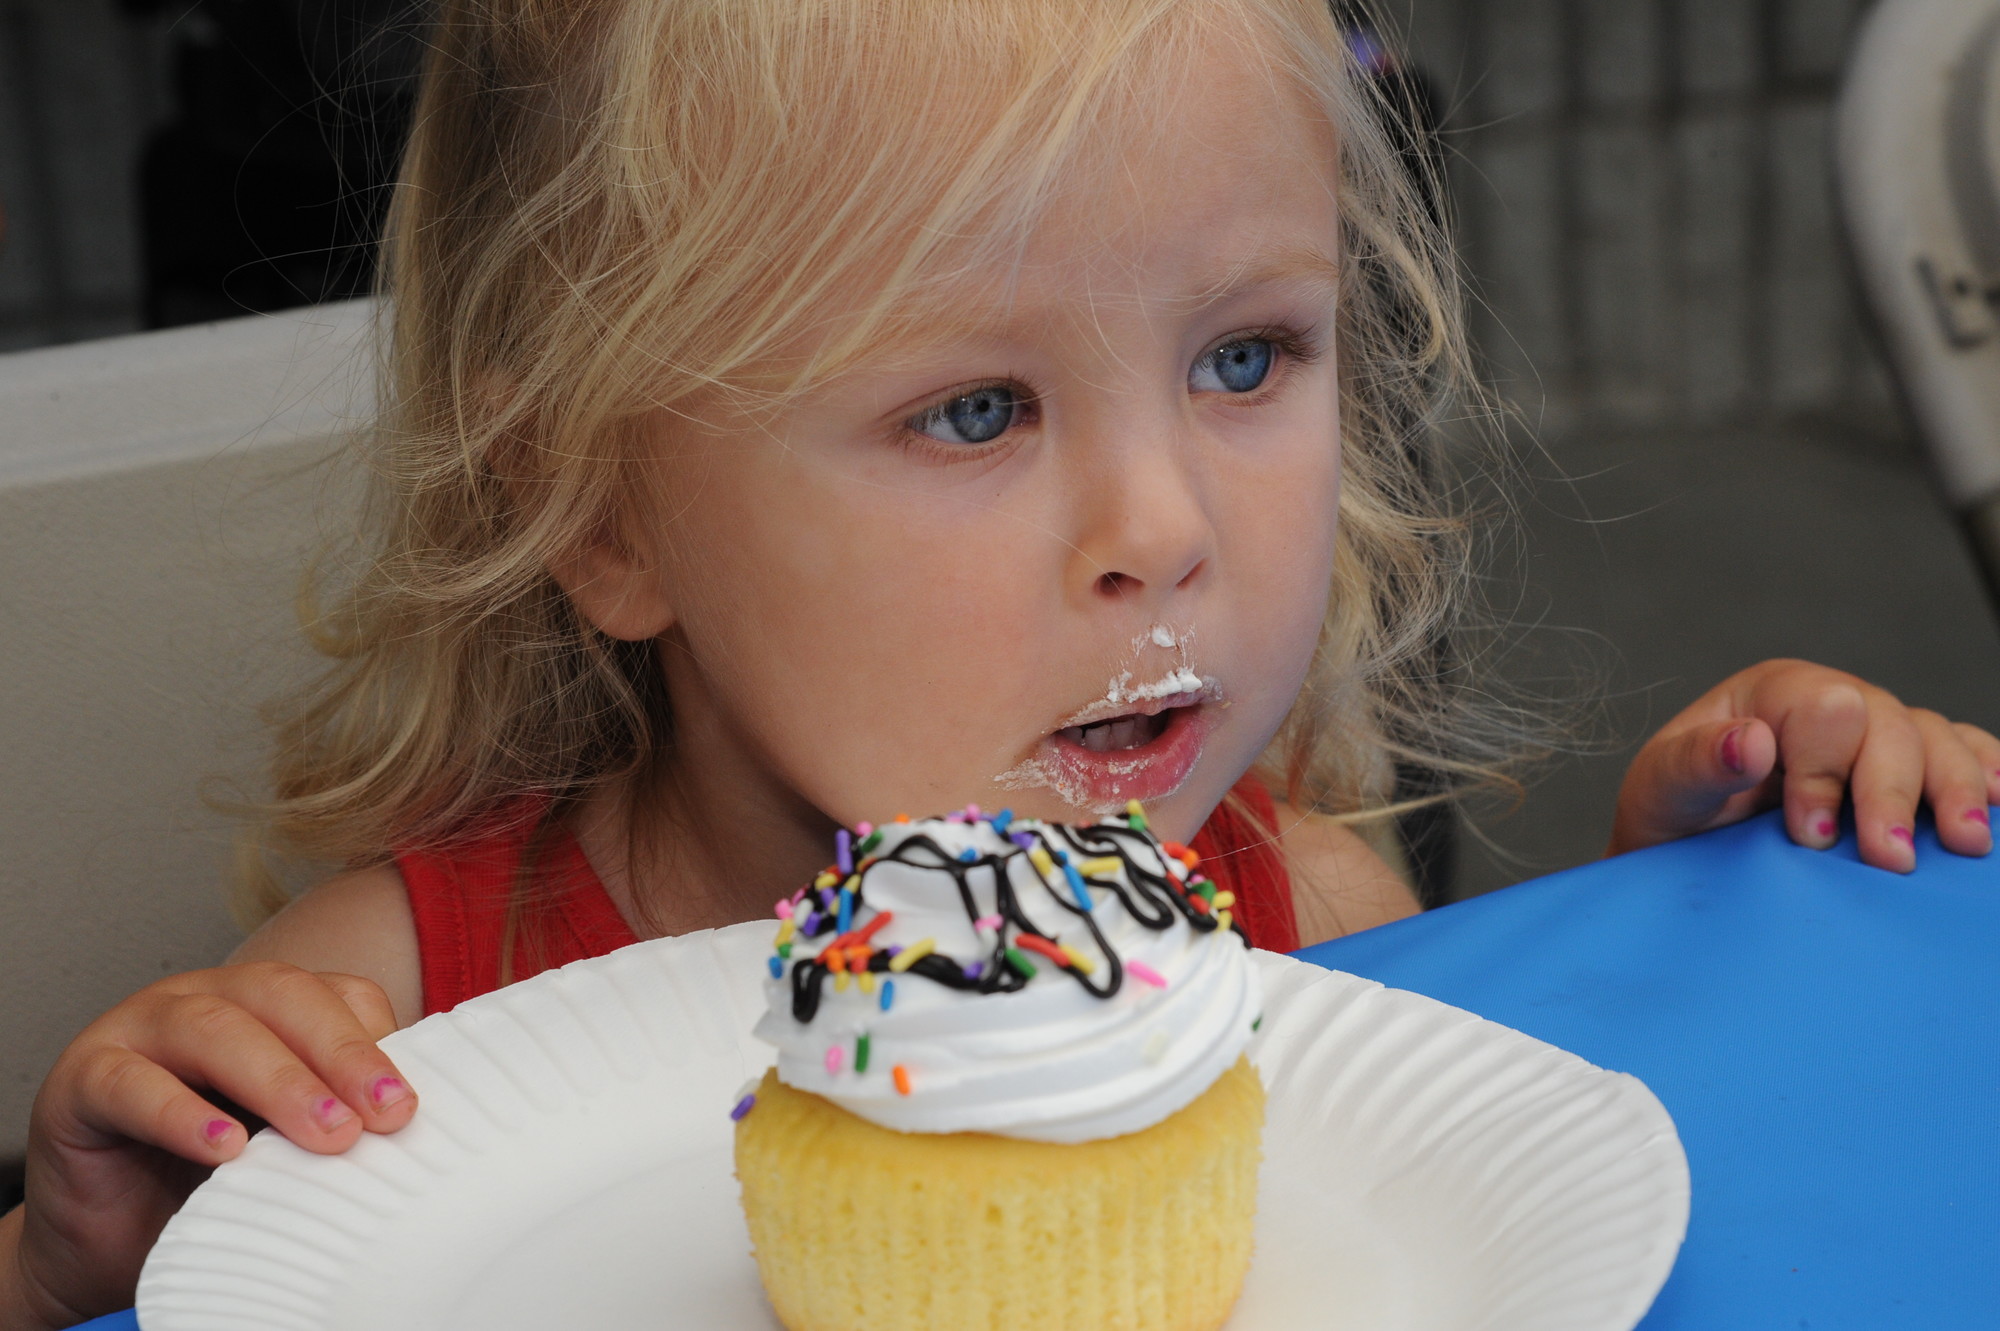 Molly Stevens, 2, wasn’t ready to finish her cupcake, even though the contest was over.